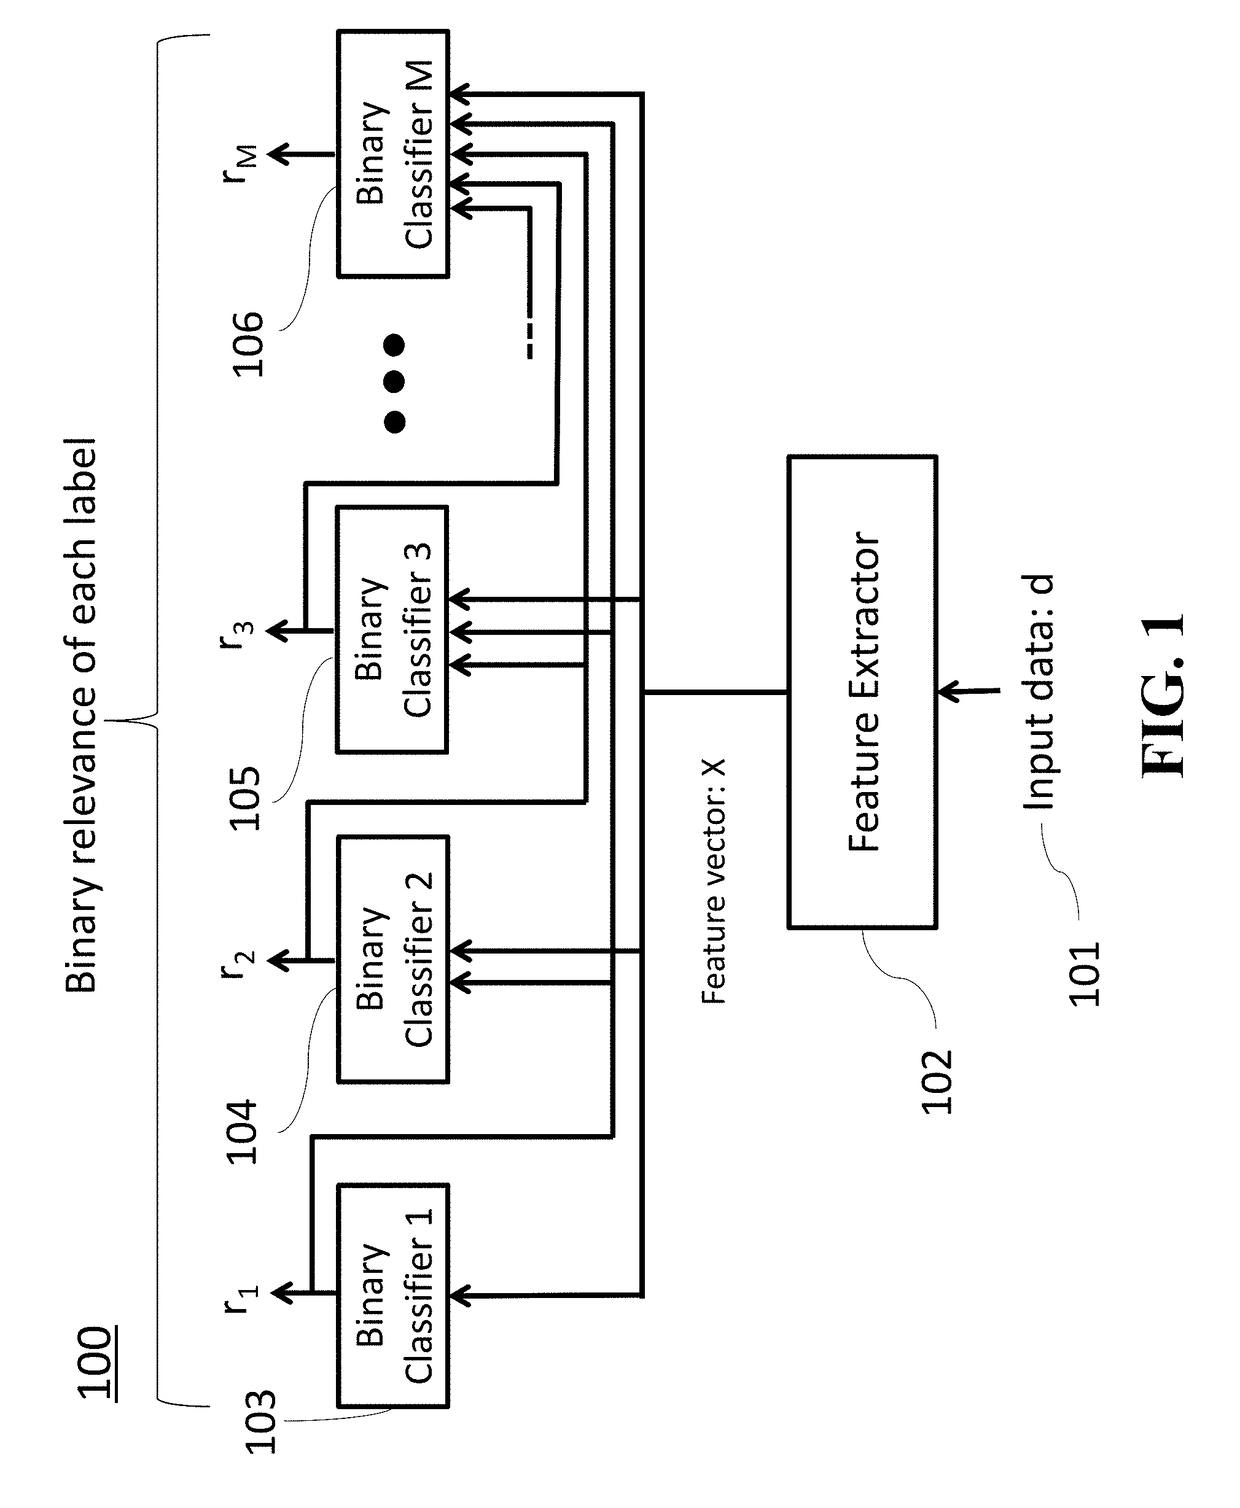 Method and System for Multi-Label Classification